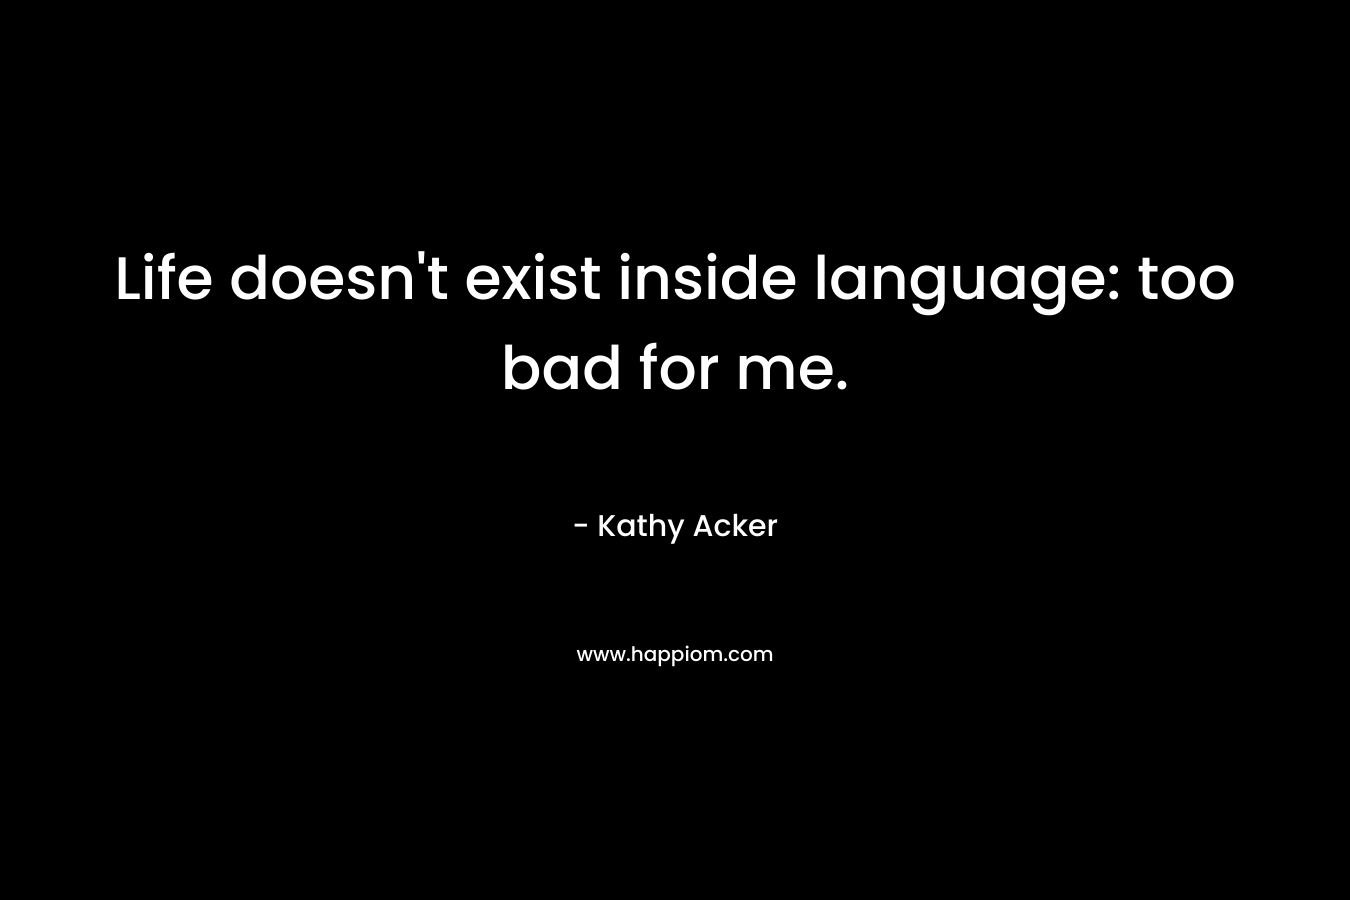 Life doesn't exist inside language: too bad for me.